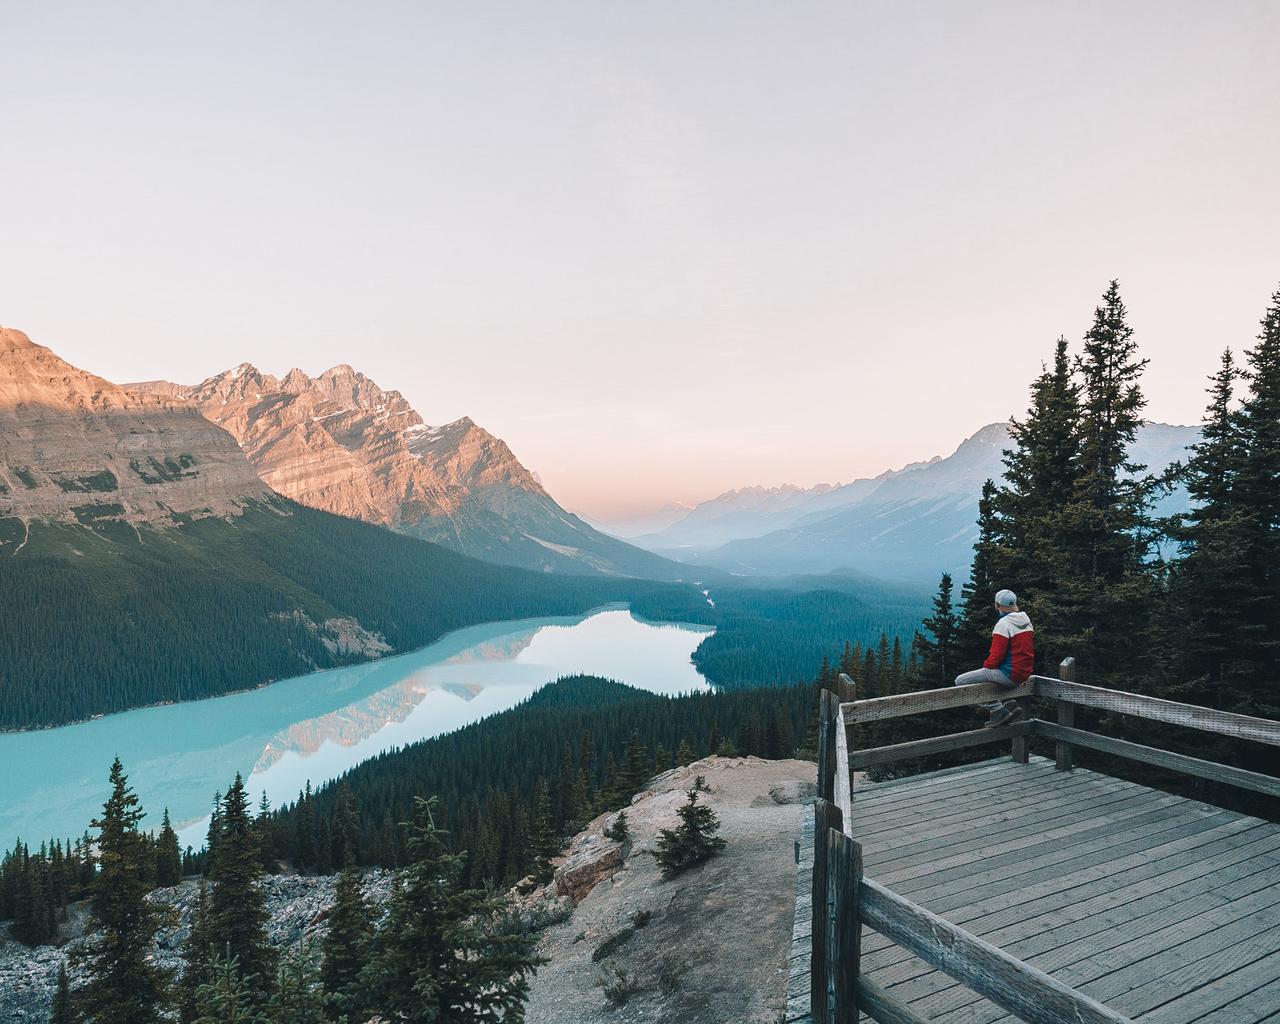 Person sitting on a balcony ledge looking out to a lake surrounded by mountains.